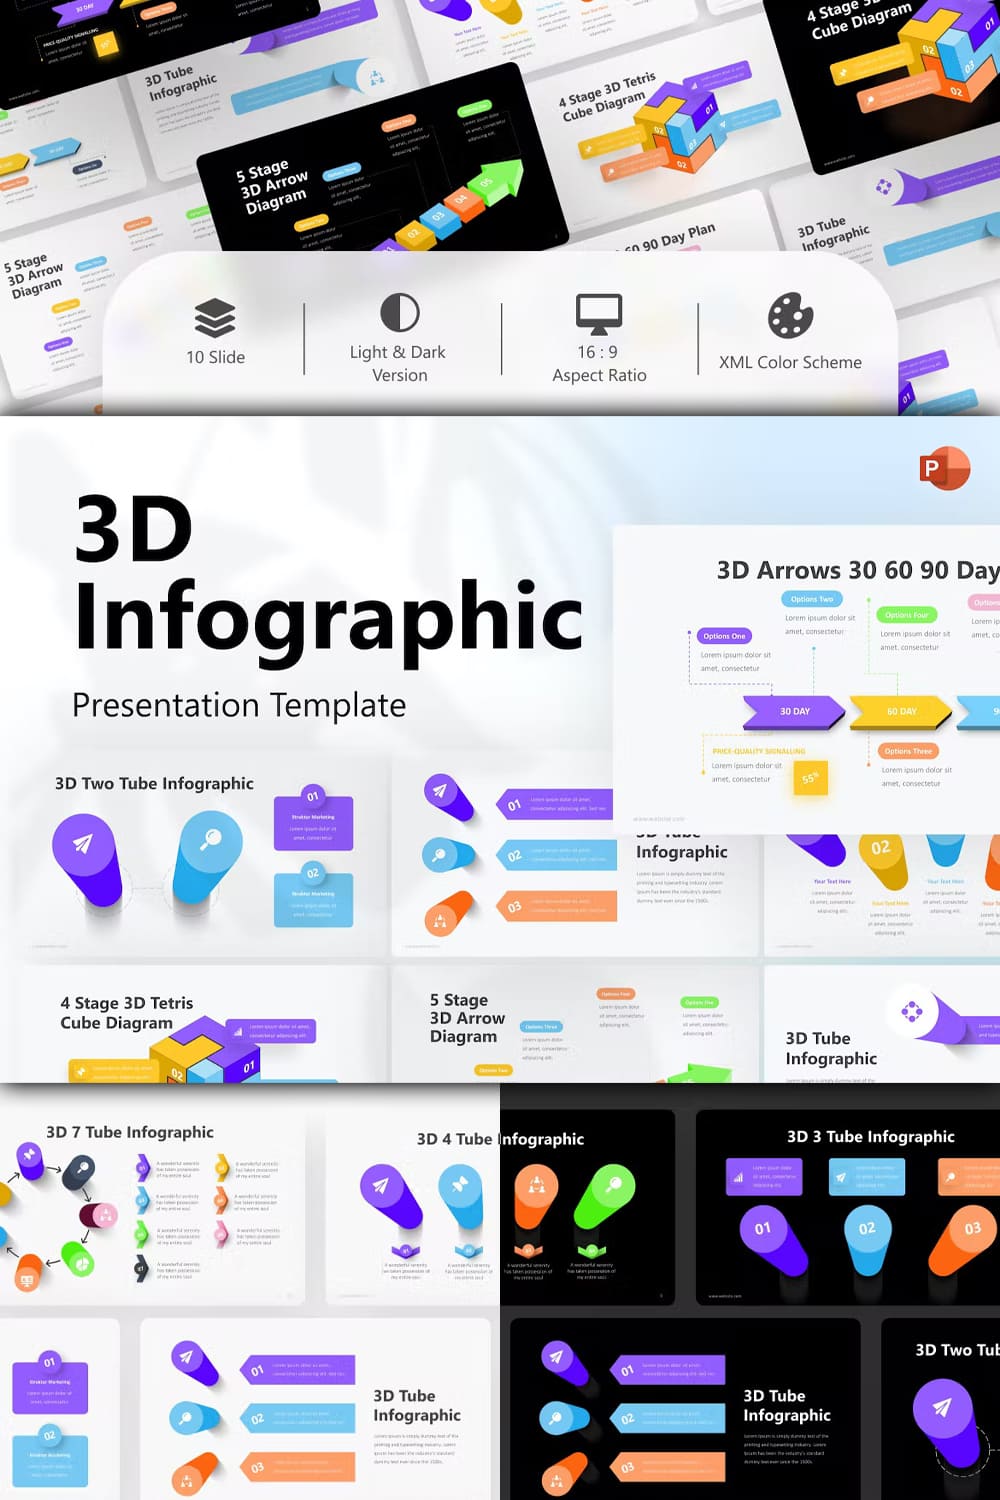 3d infographic powerpoint template - pinterest image preview.